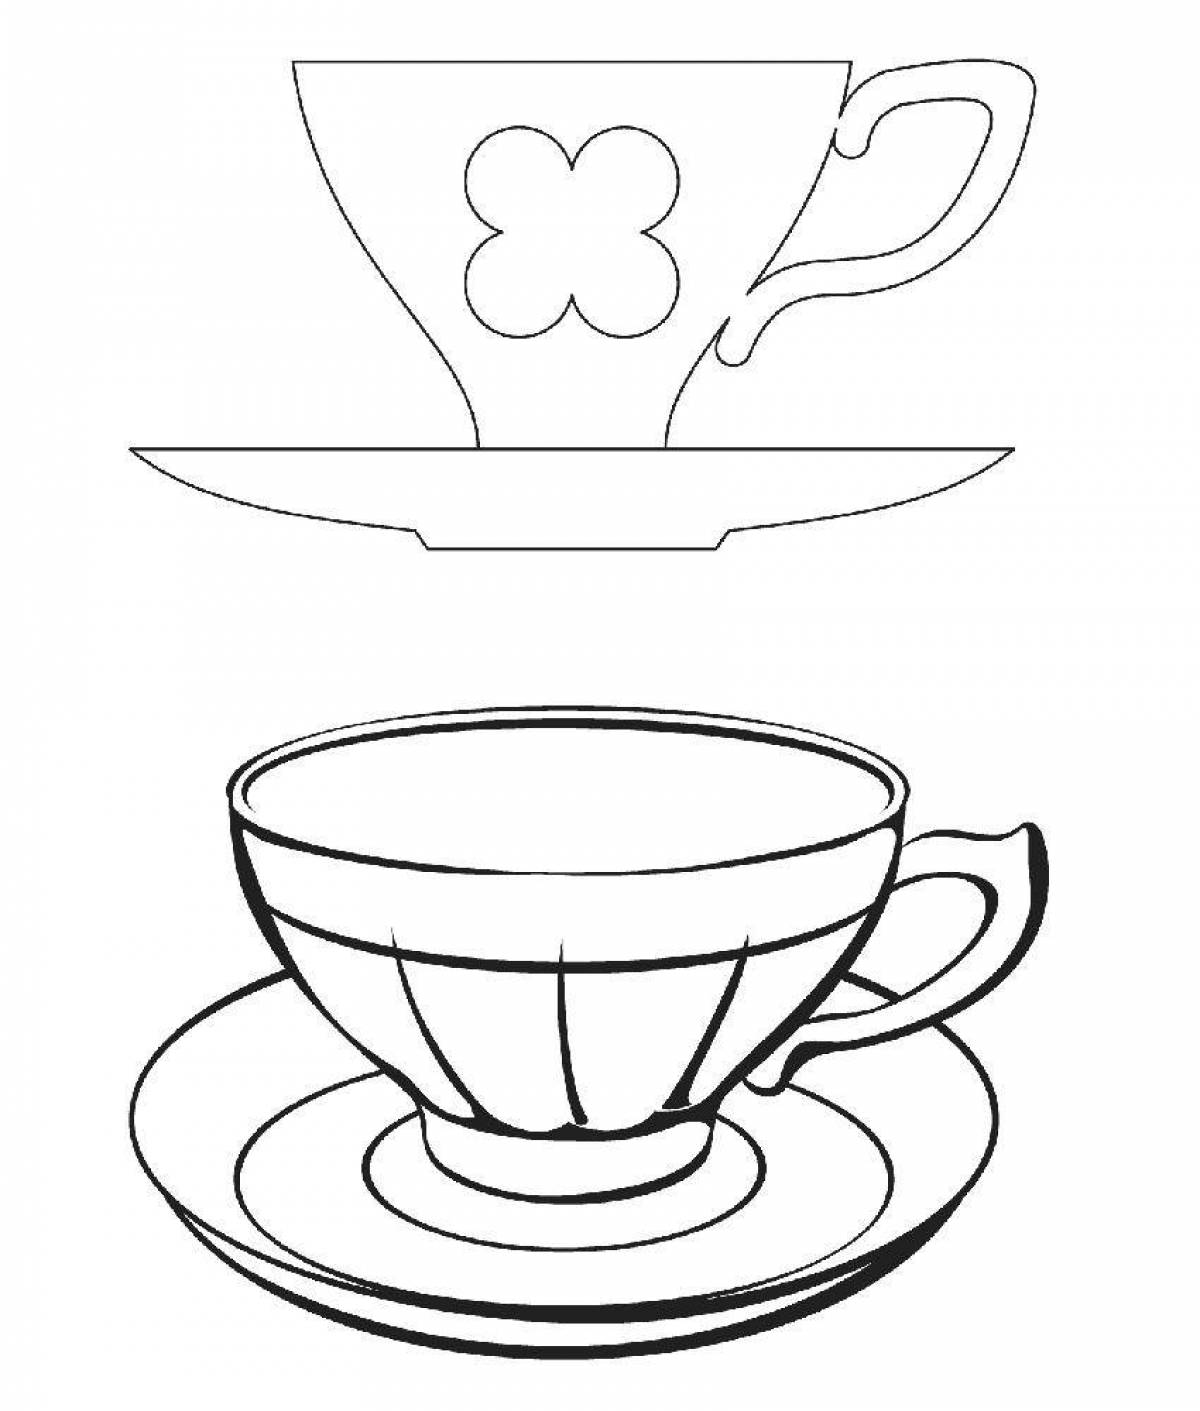 Coloring page gorgeous cup and saucer